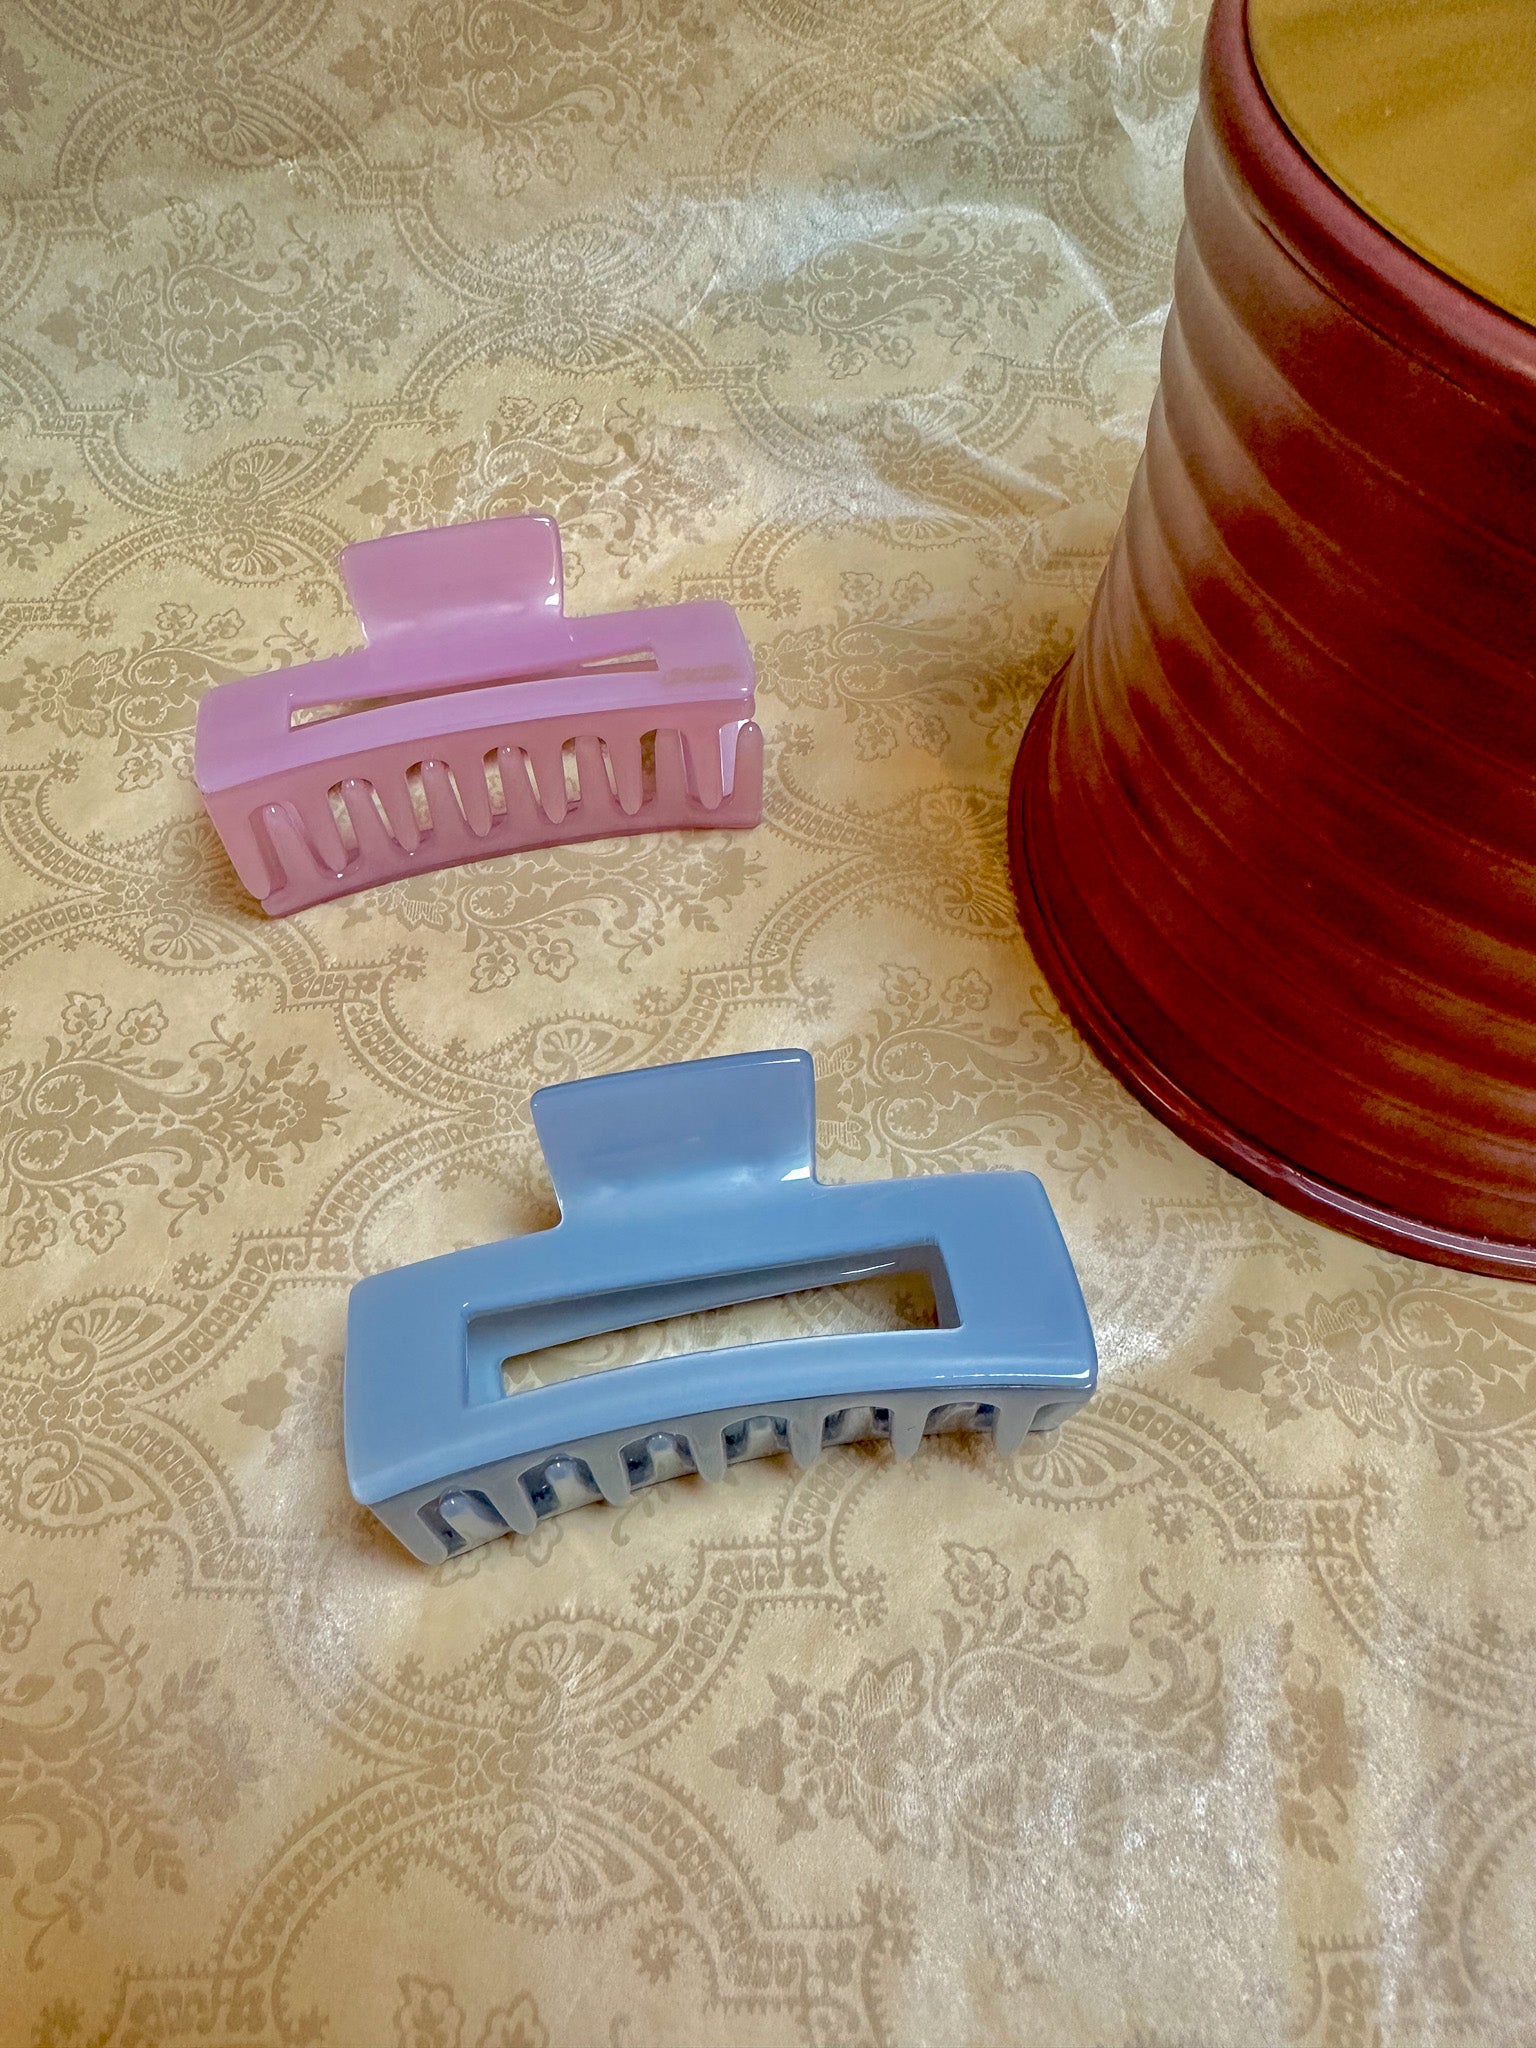 Candy-Colored Rectangular Hair Clip